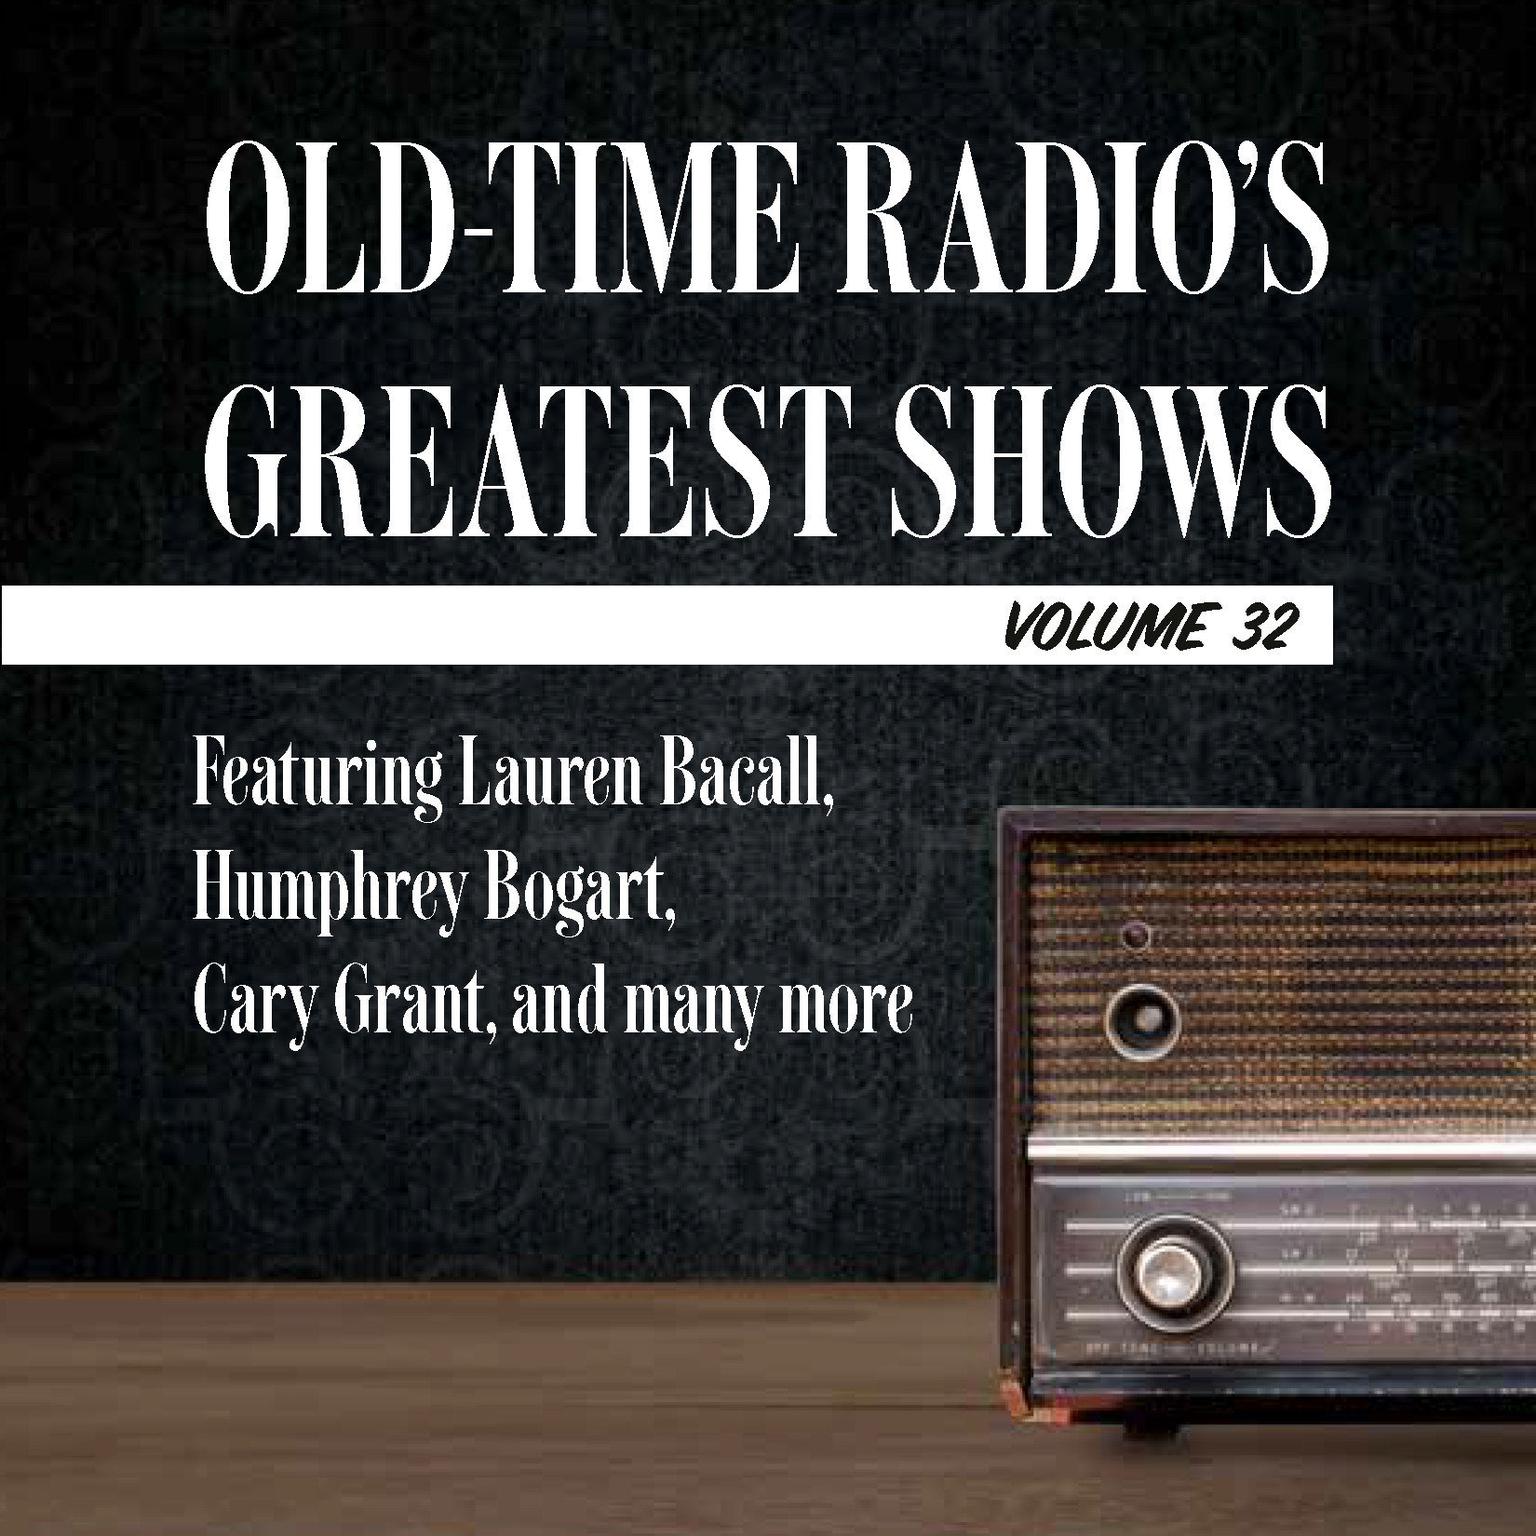 Old-Time Radios Greatest Shows, Volume 32: Featuring Lauren Bacall, Humphrey Bogart, Cary Grant, and many more Audiobook, by Carl Amari